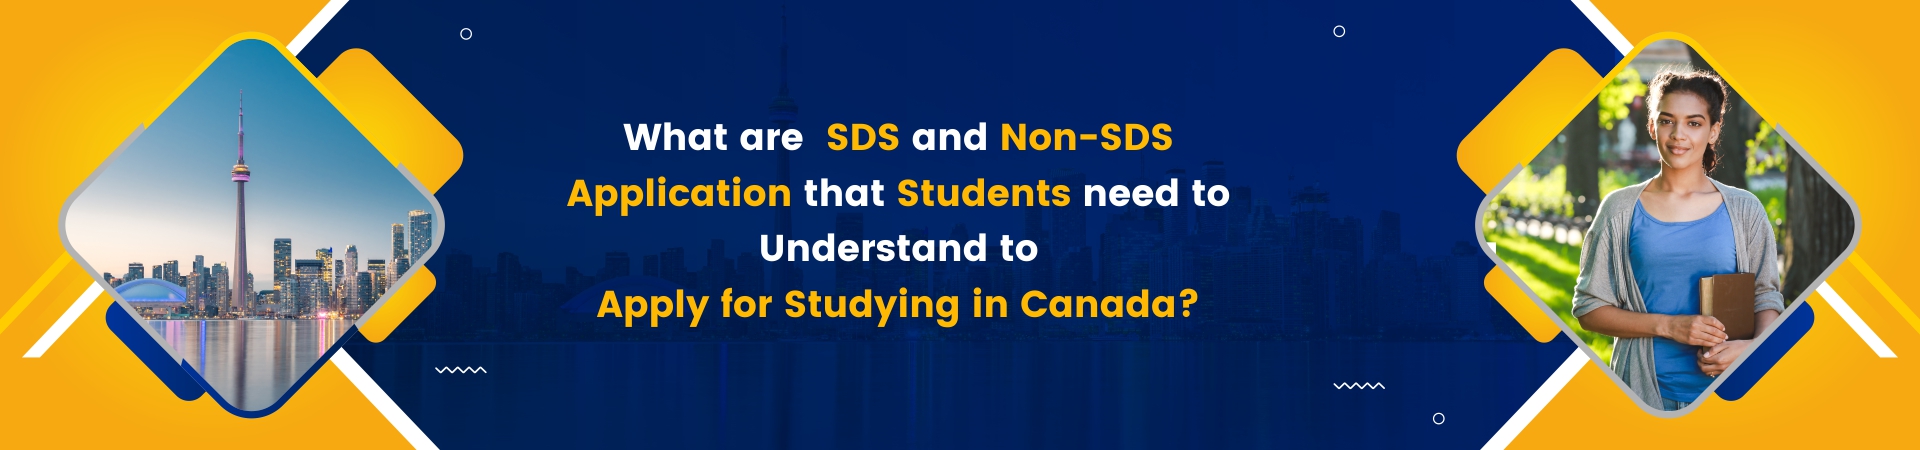 What are  SDS and Non-SDS Application that students need to understand to apply for studying in Canada?